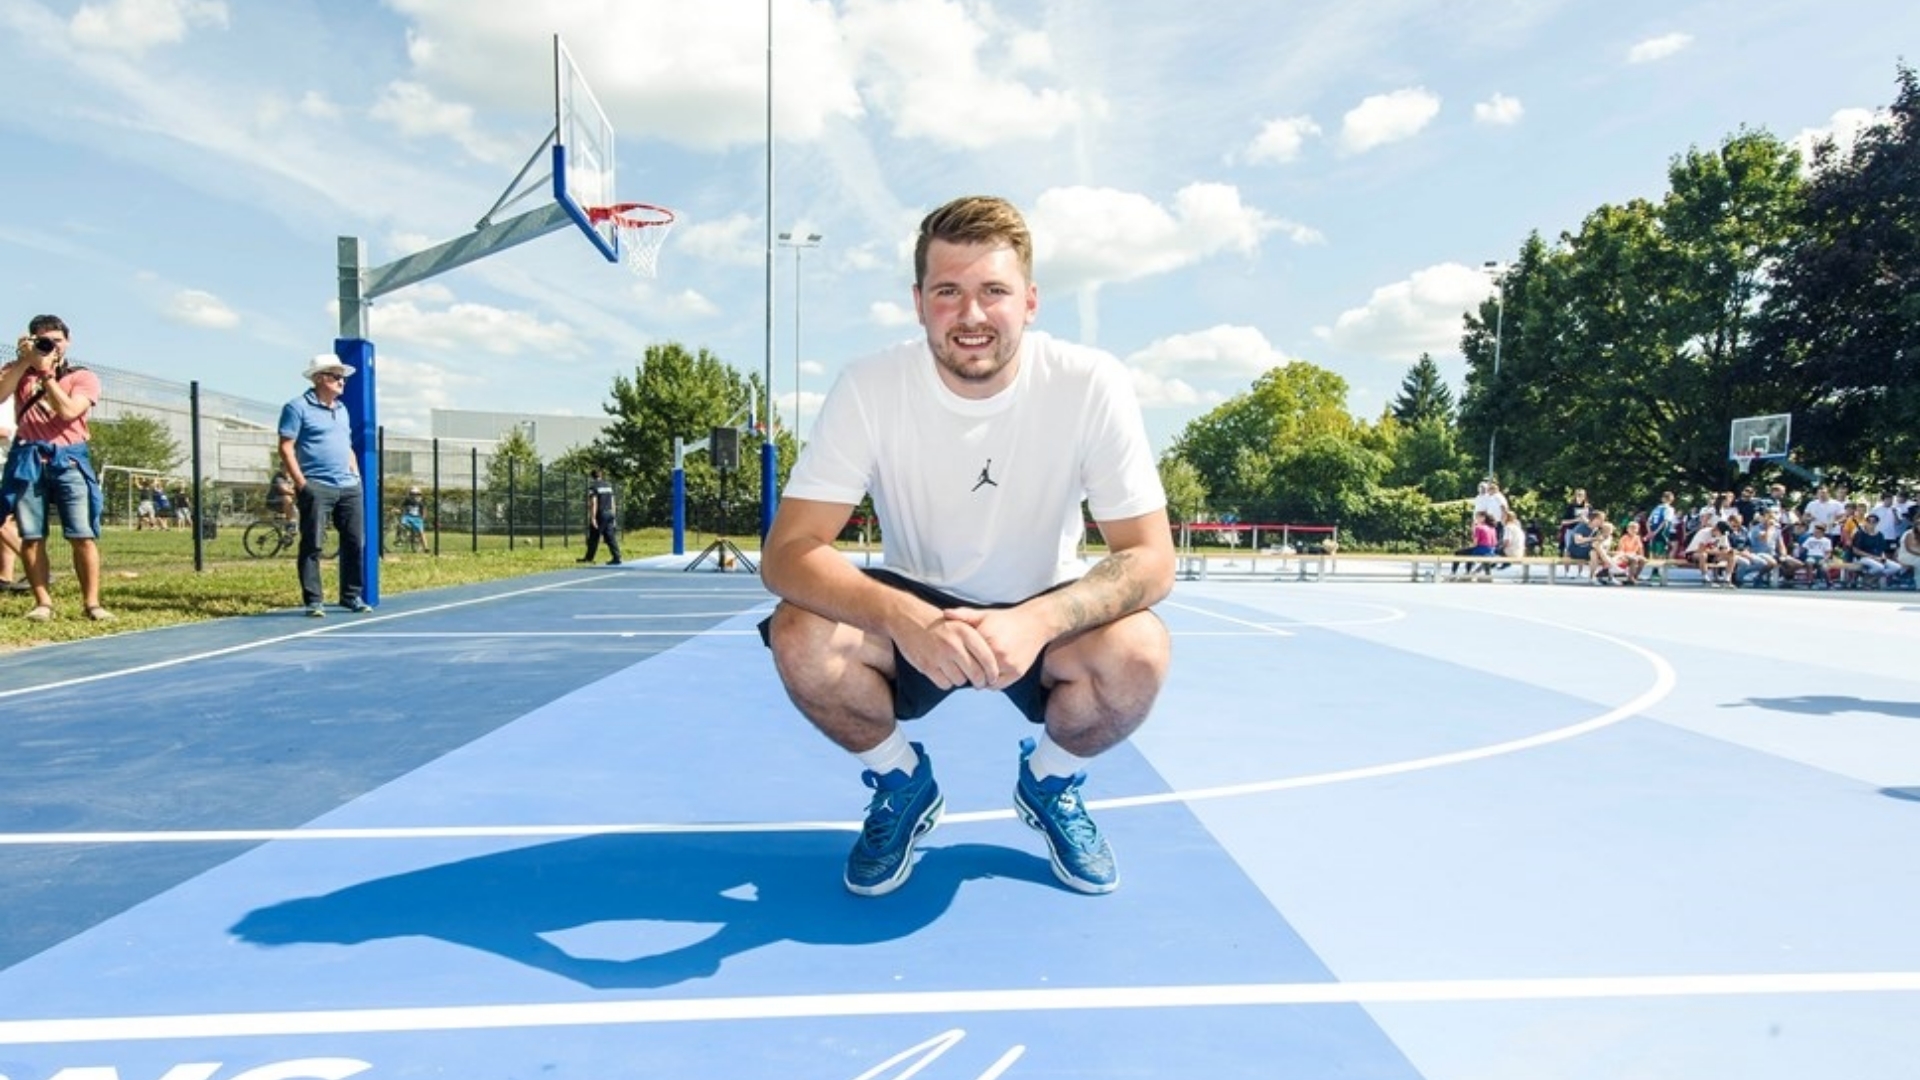 Together with 2K Foundations, Luka Doncic restored two basketball courts in his hometown in Slovenia | NBA.com Mexico | The Official Site of the NBA